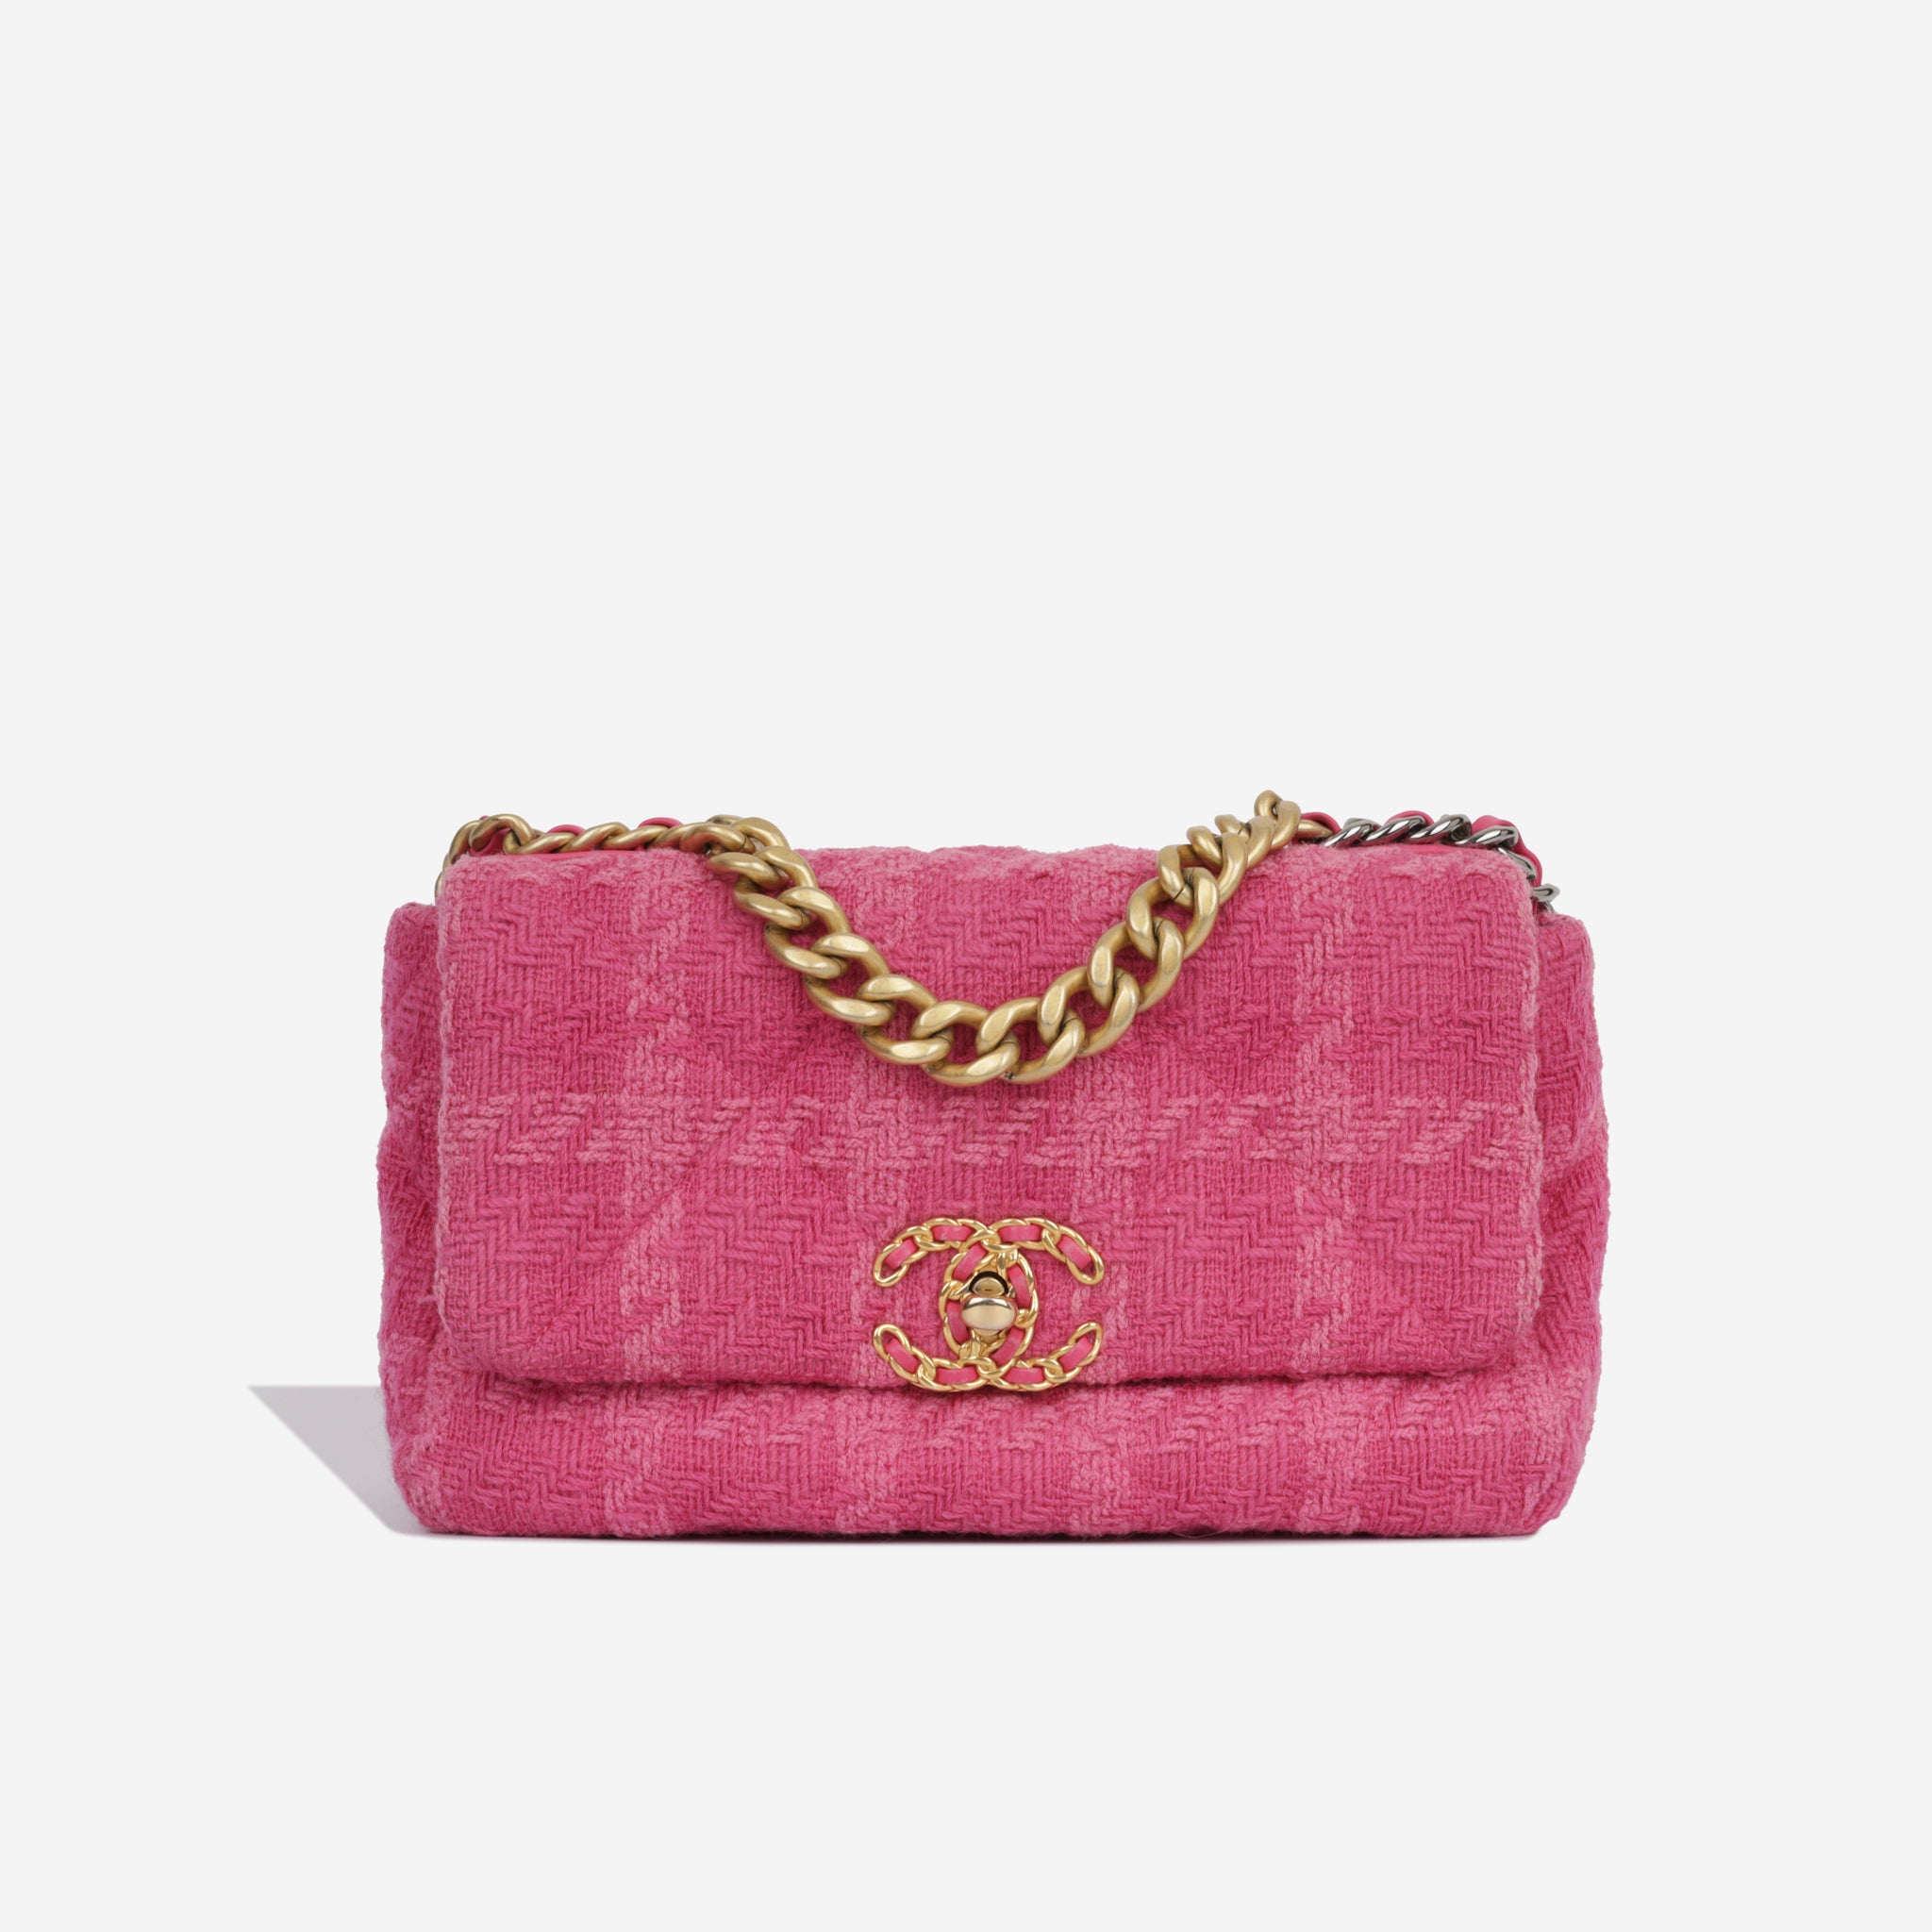 Chanel 19 pouch/ small clutch